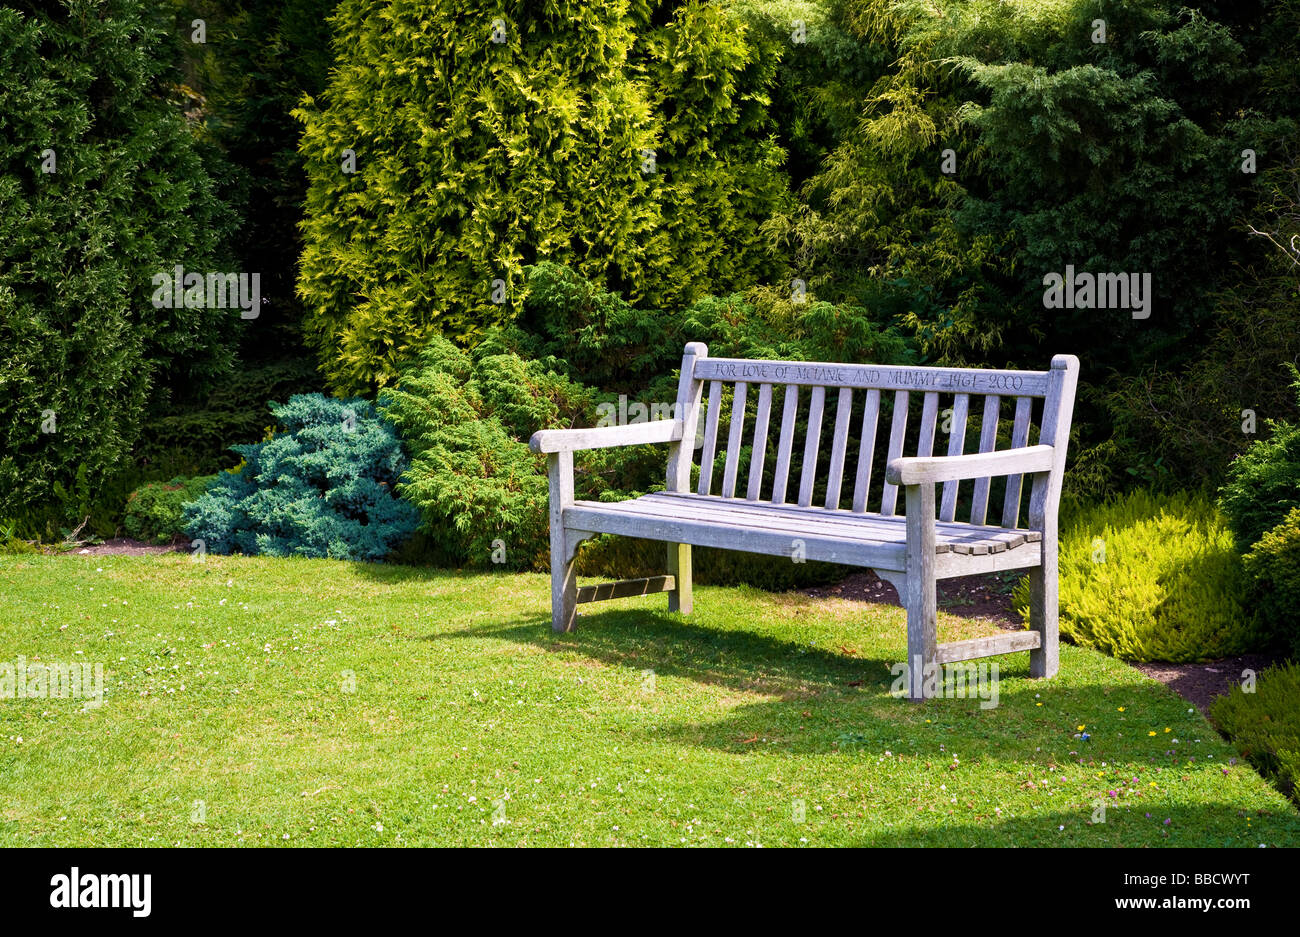 Wooden Memorial Garden Seat Or Bench With Evergreen Trees Behind